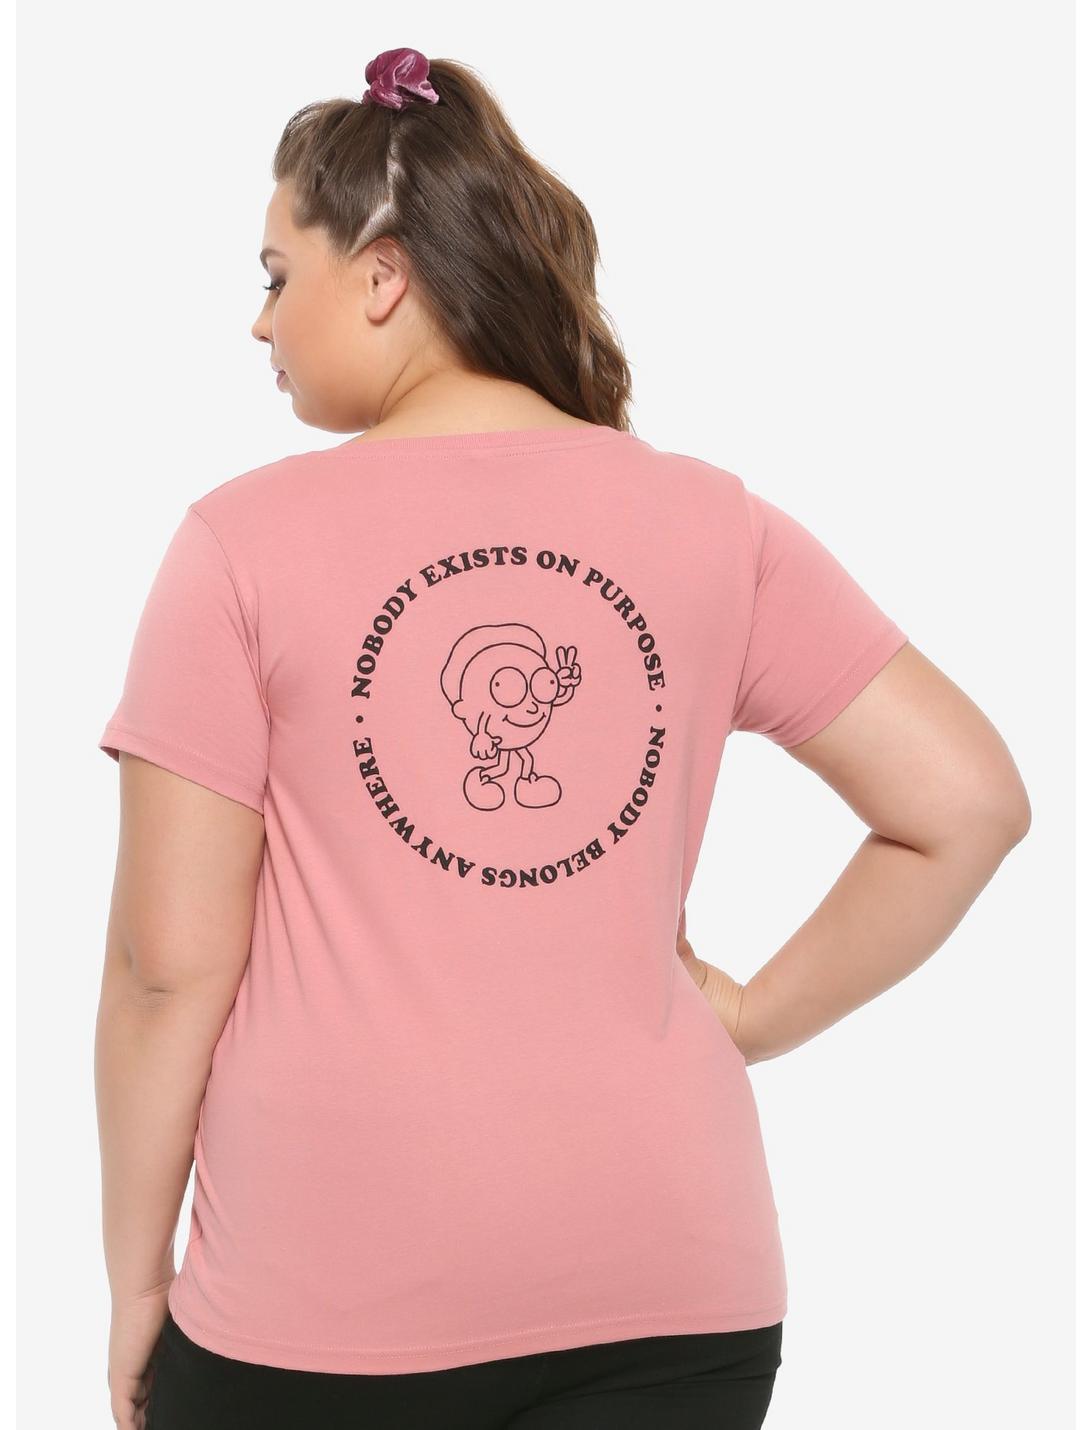 Rick And Morty Nobody Exists On Purpose Girls T-Shirt Plus Size, BLACK, hi-res